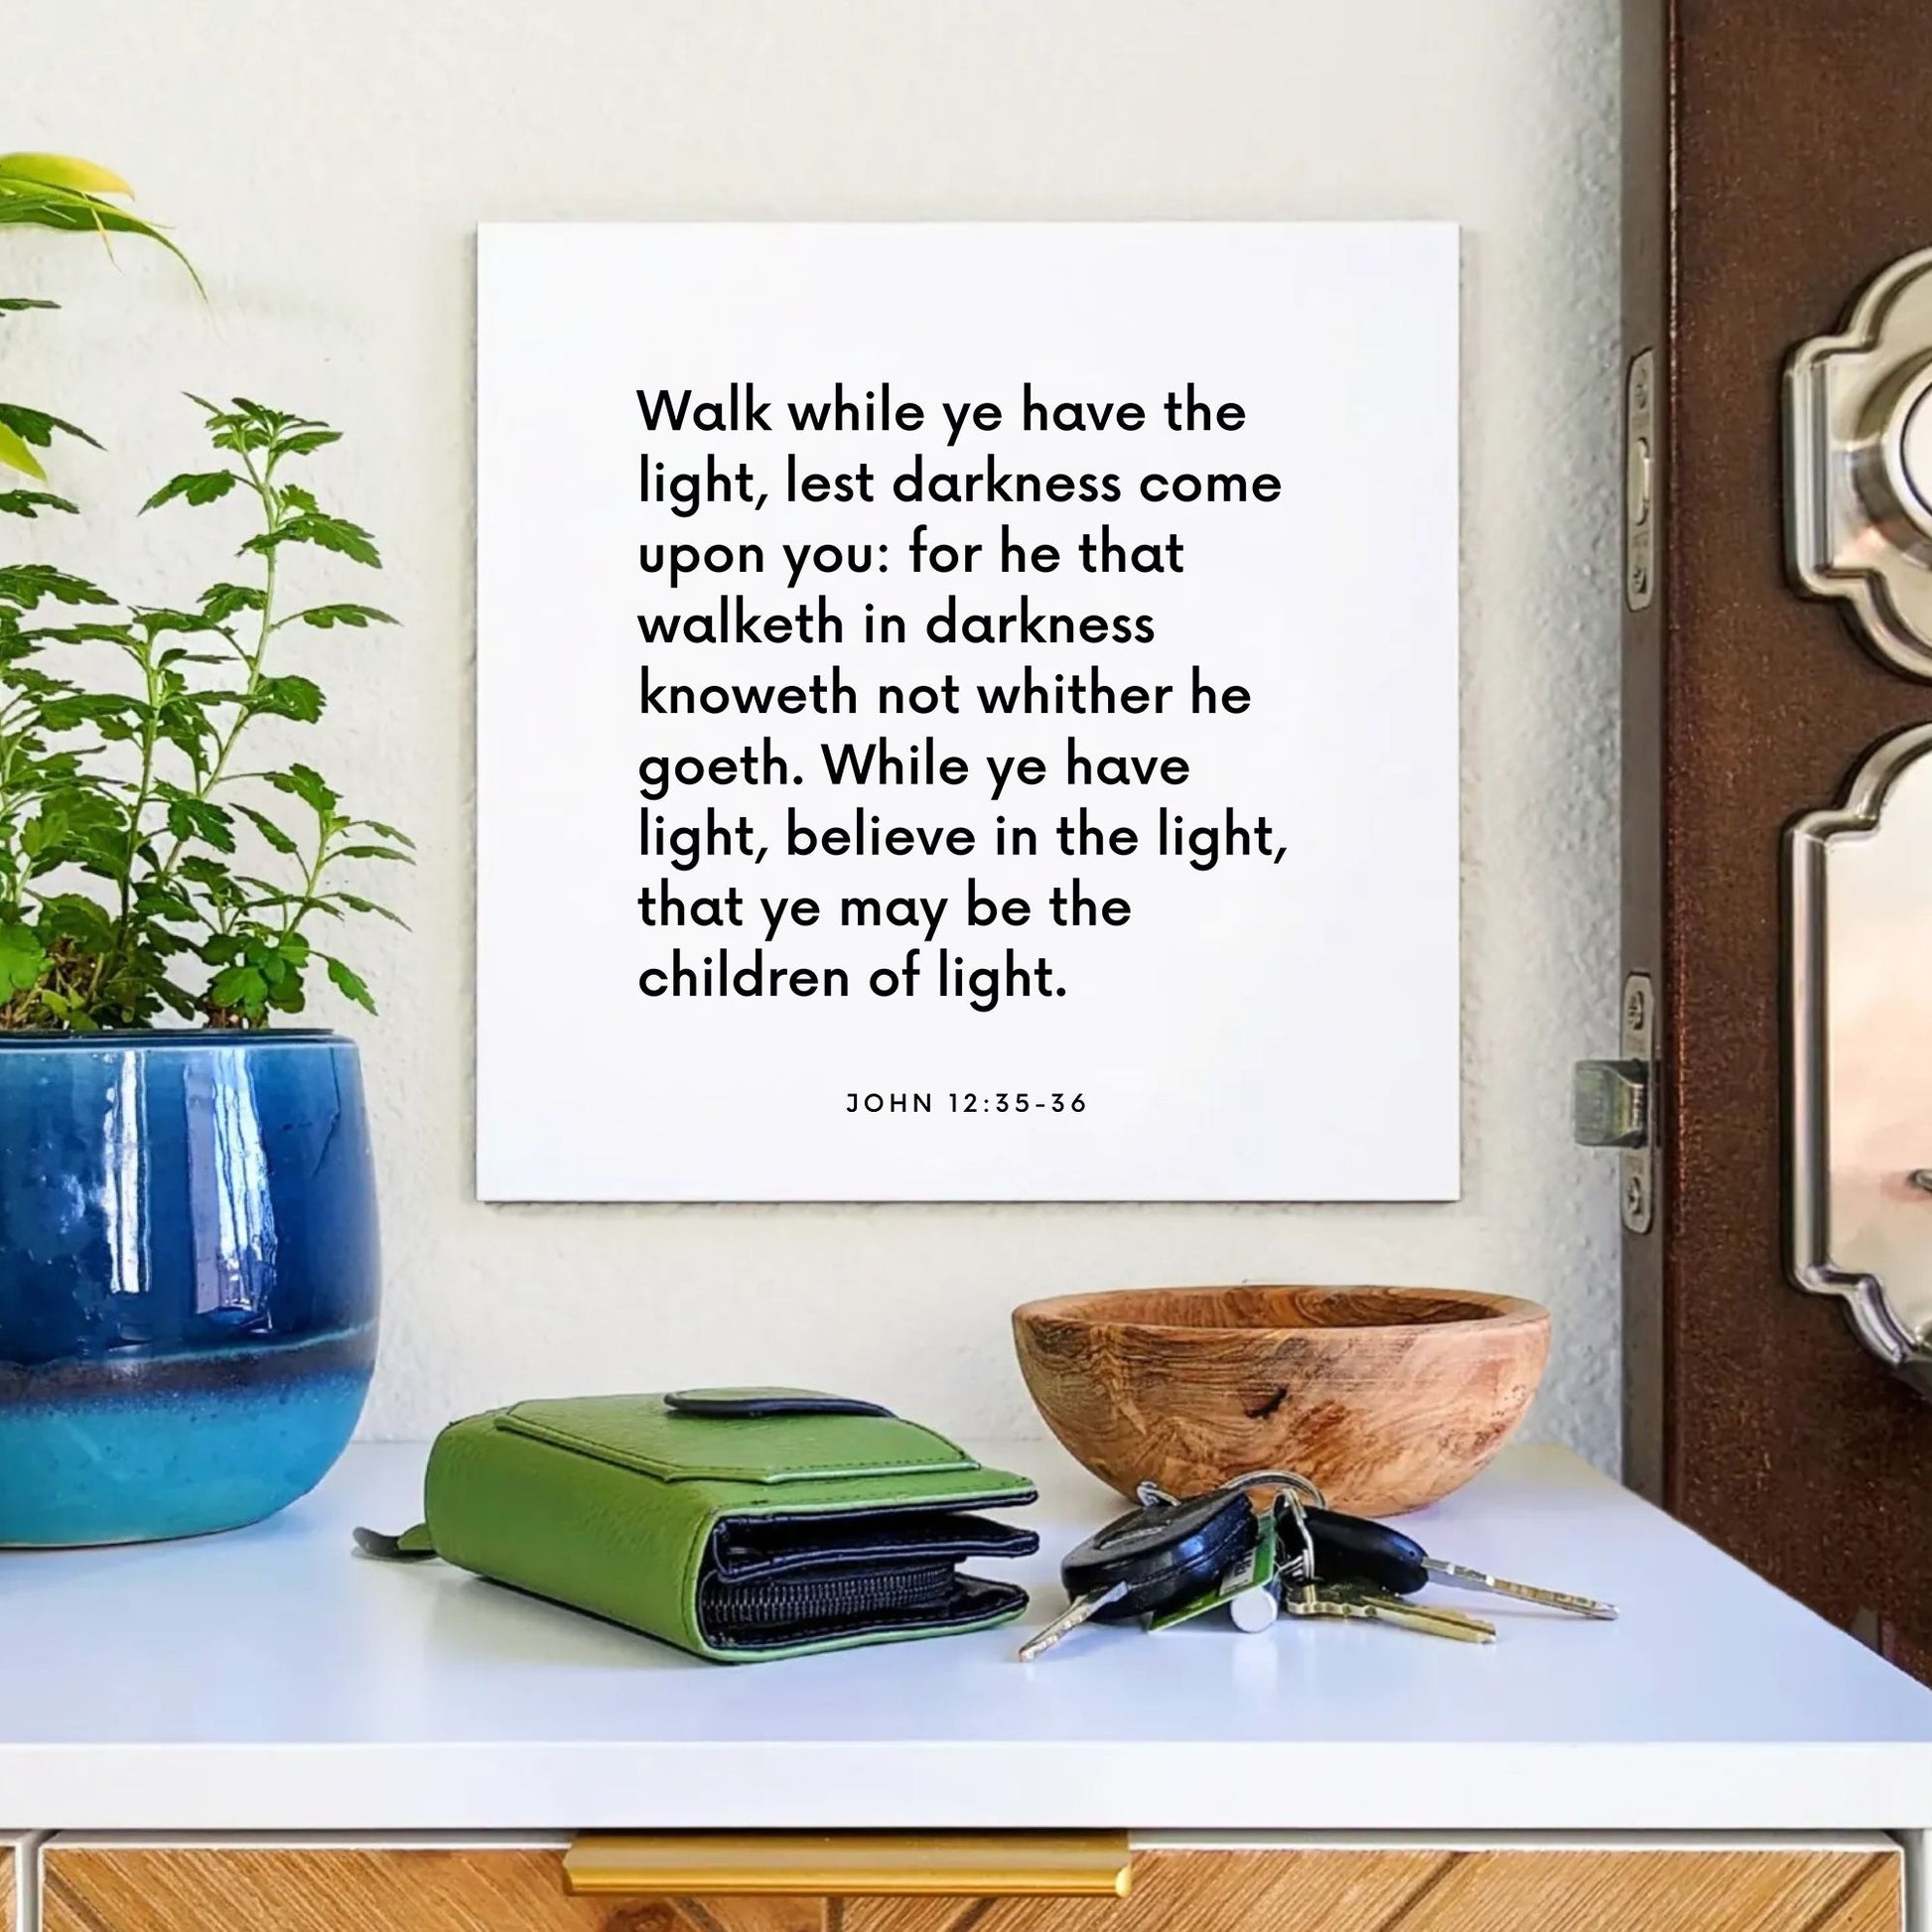 Entryway mouting of the scripture tile for John 12:35-36 - "Walk while ye have the light, lest darkness come upon you"